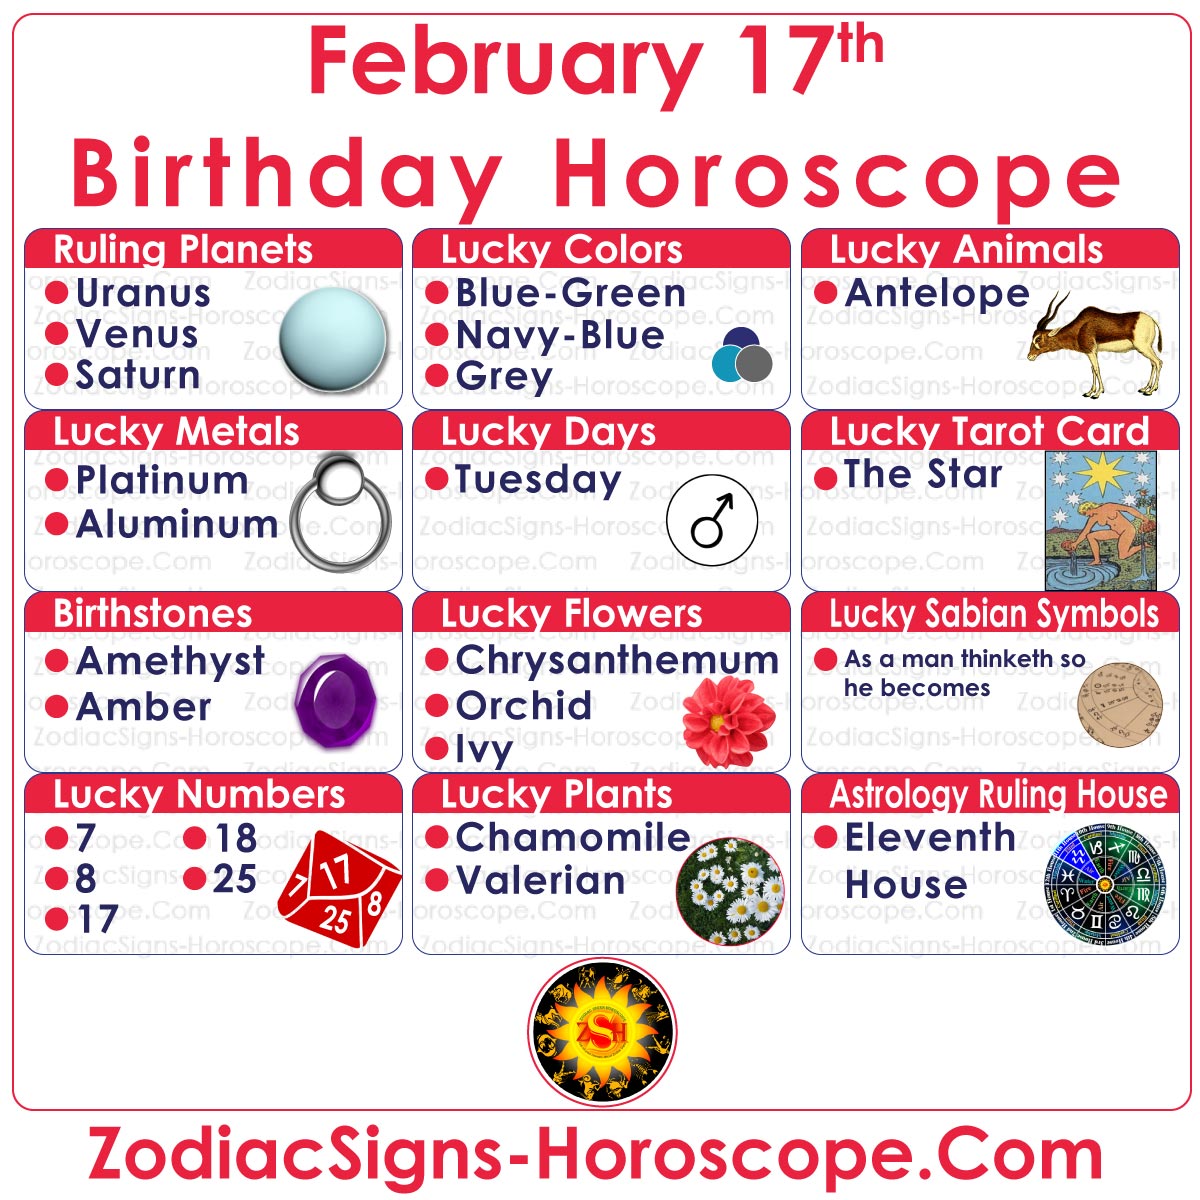 What is the zodiac sign of February 17?